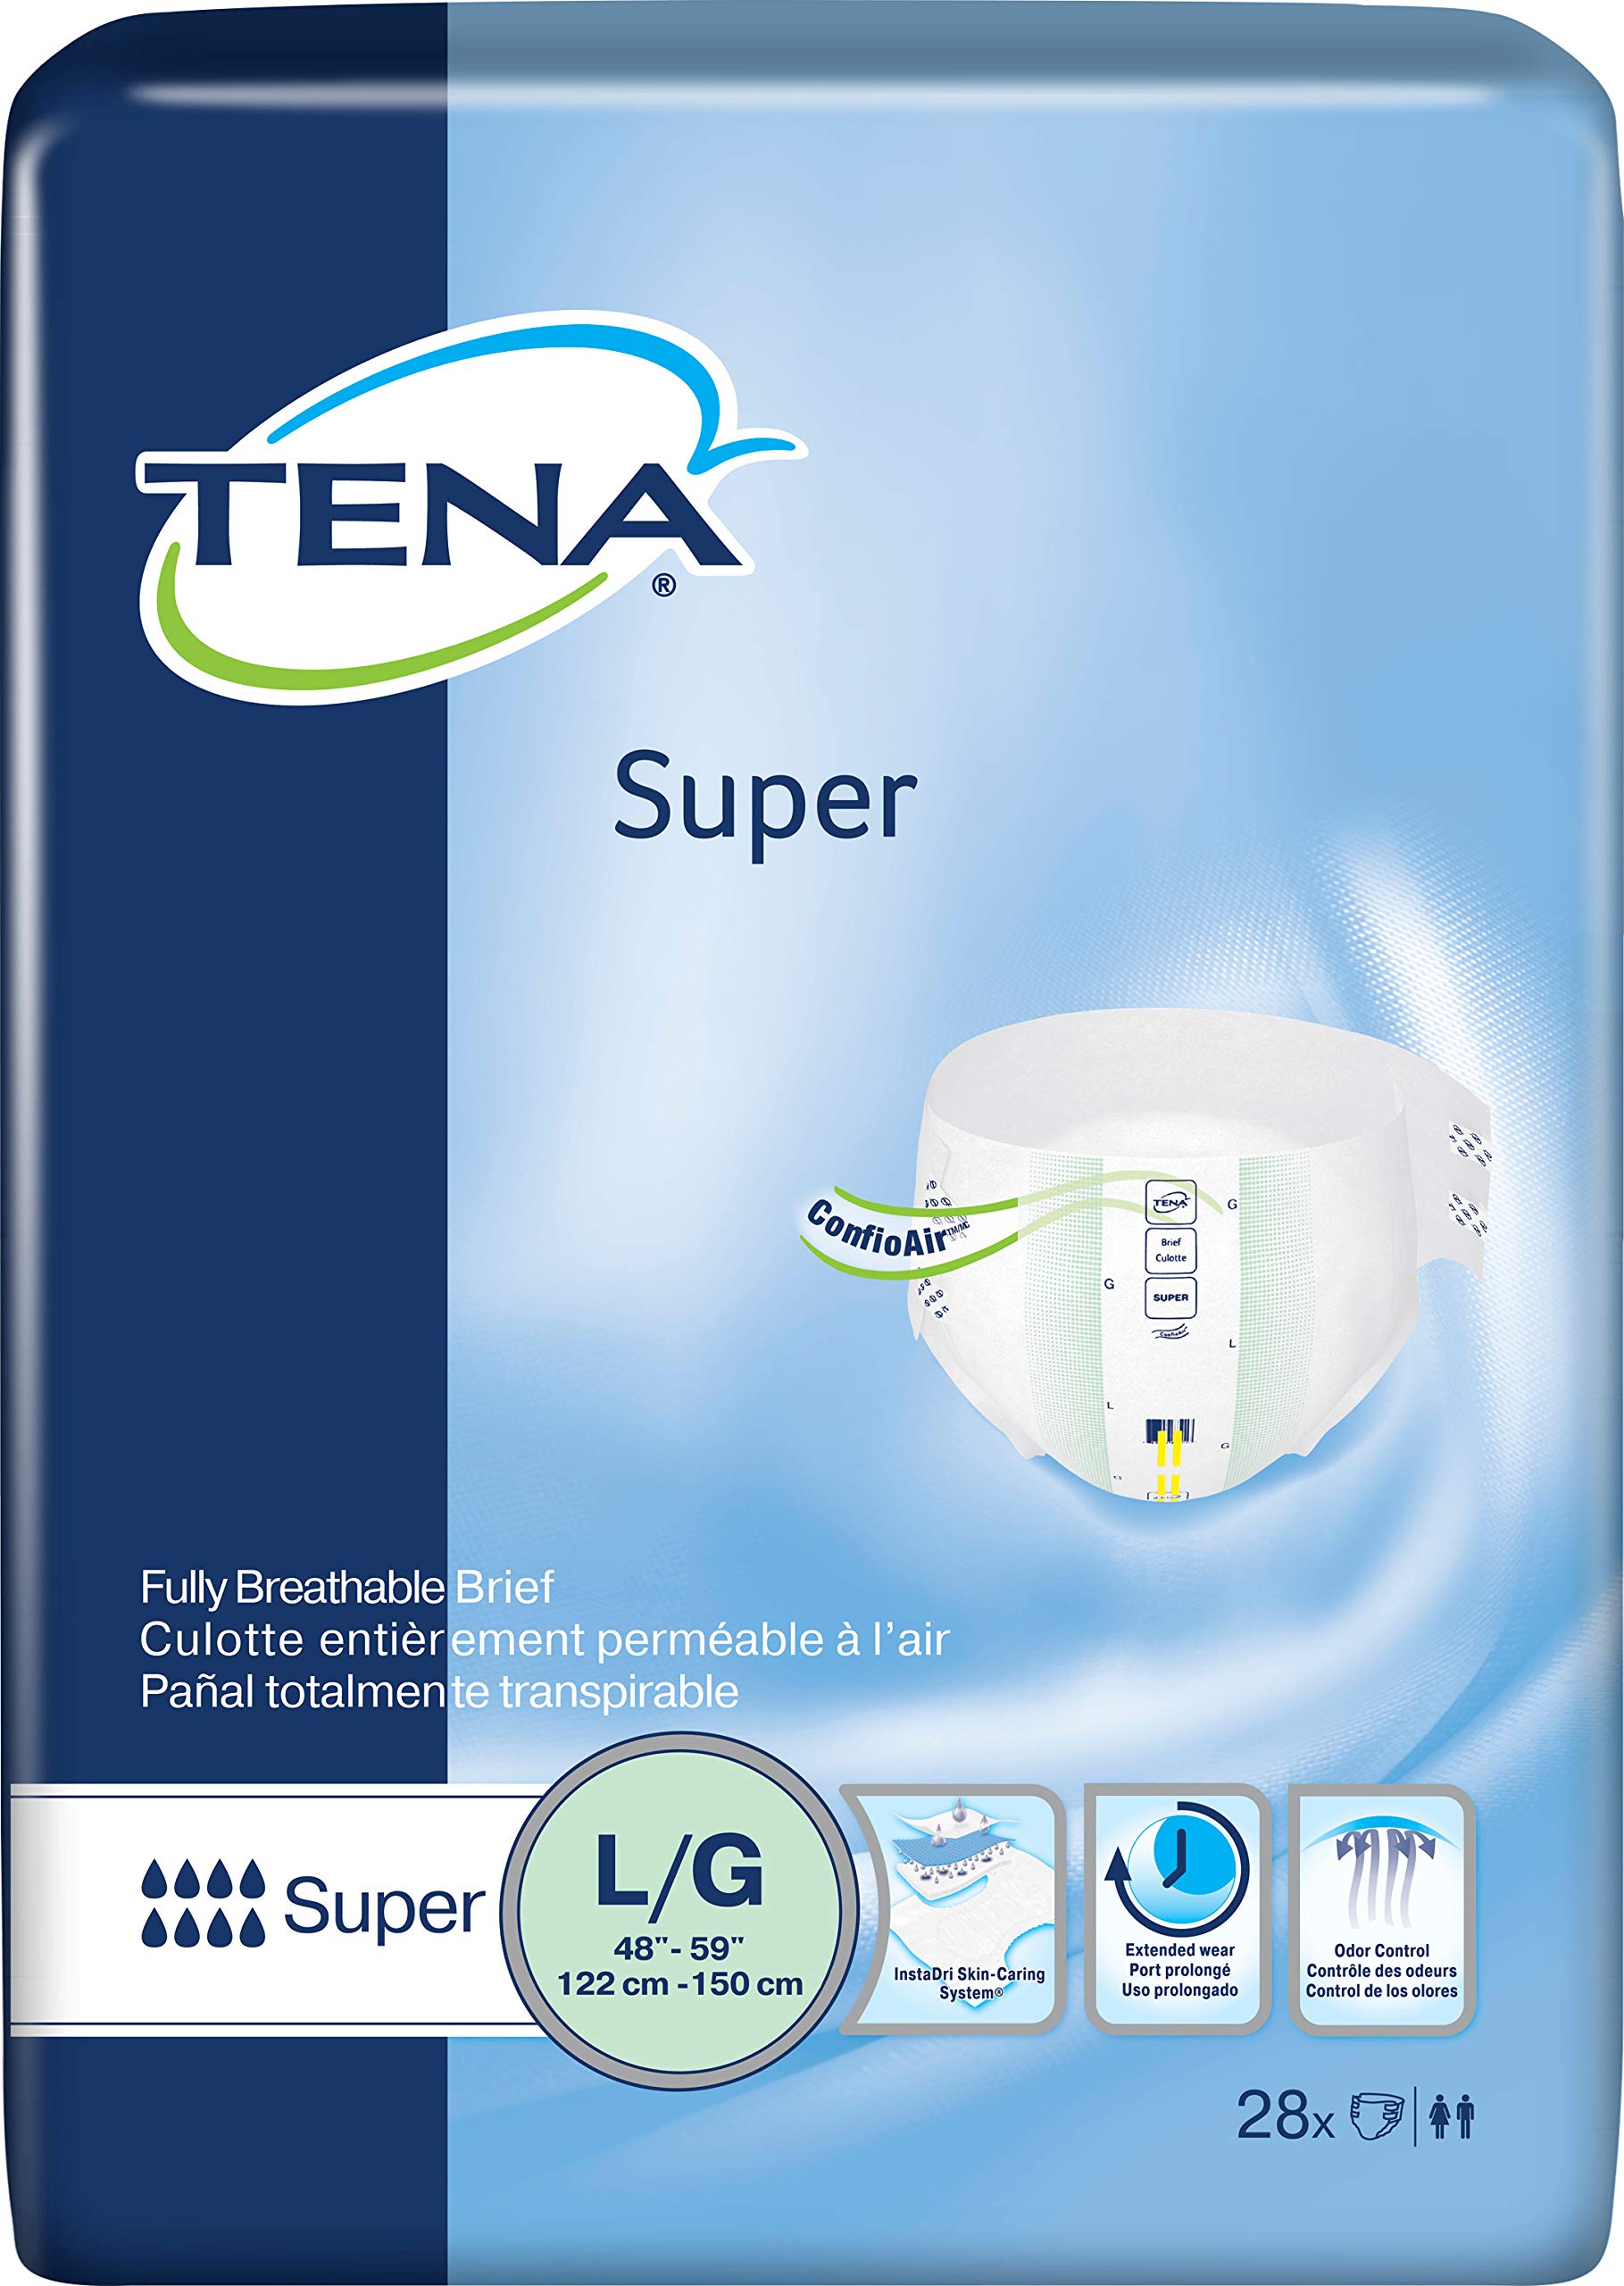 Tena Super Incontinence Briefs, Size: Large (48 Inches-59 Inches) - 28 / bag,...